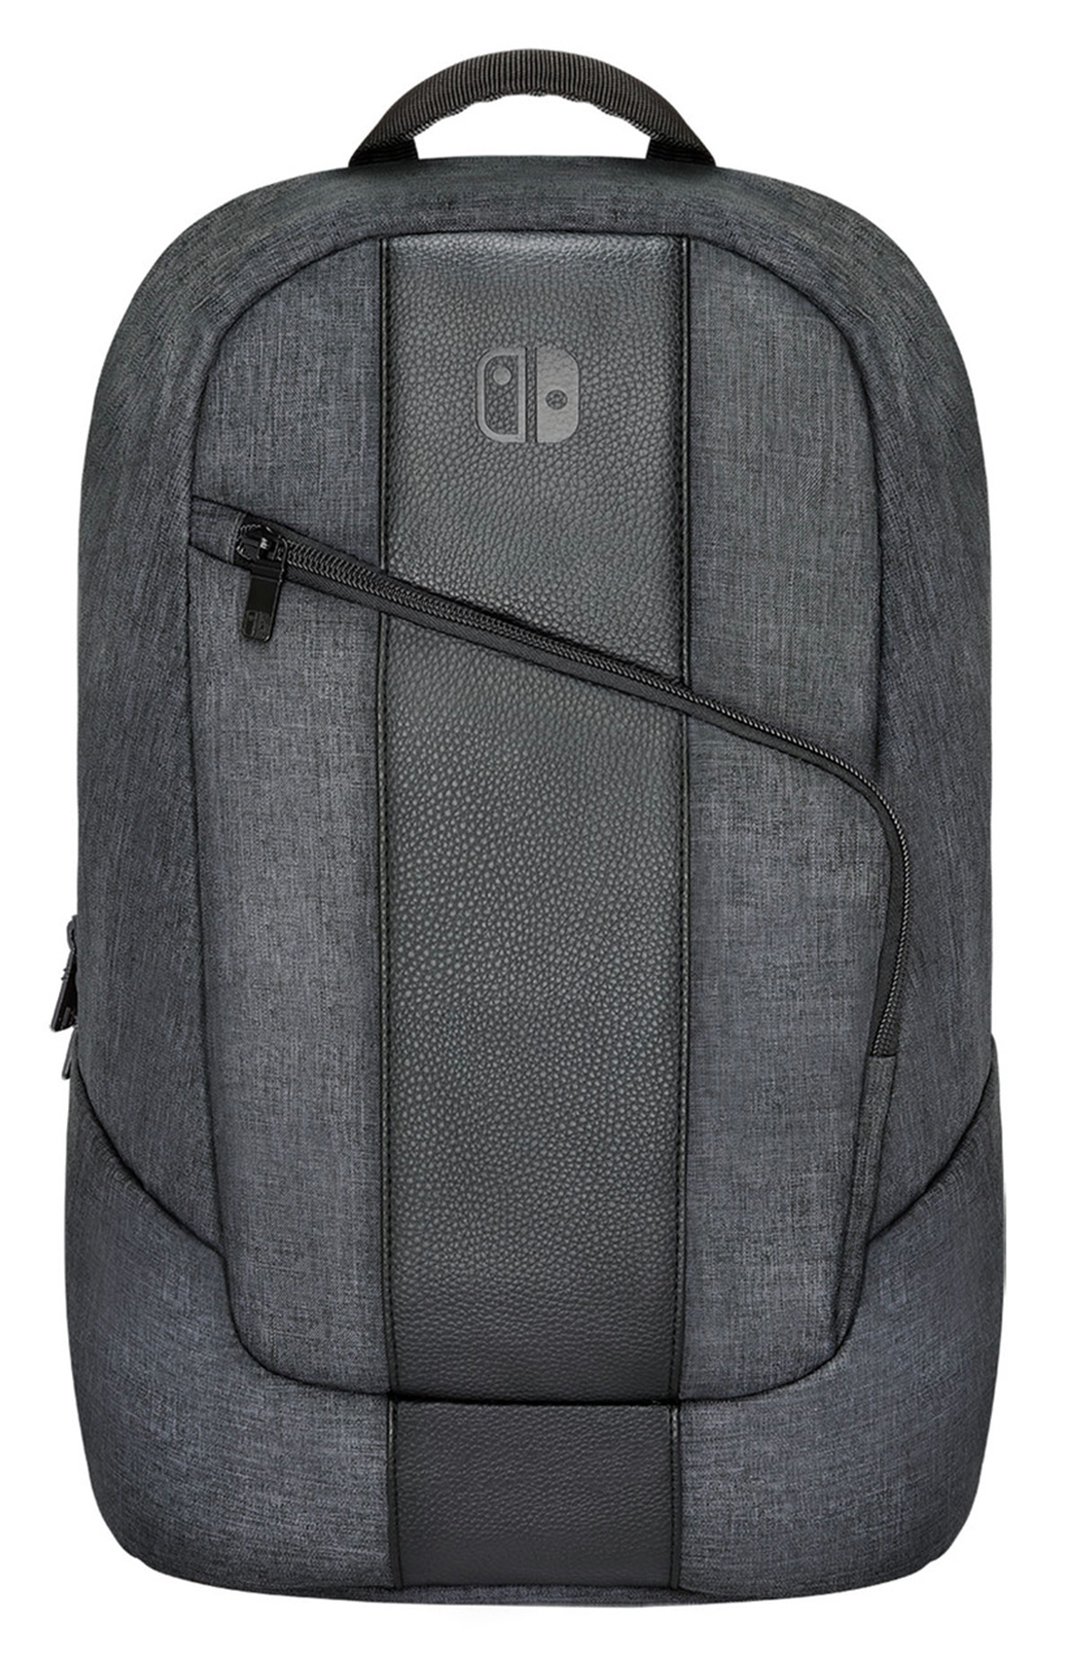 Nintendo Switch Elite Players Backpack